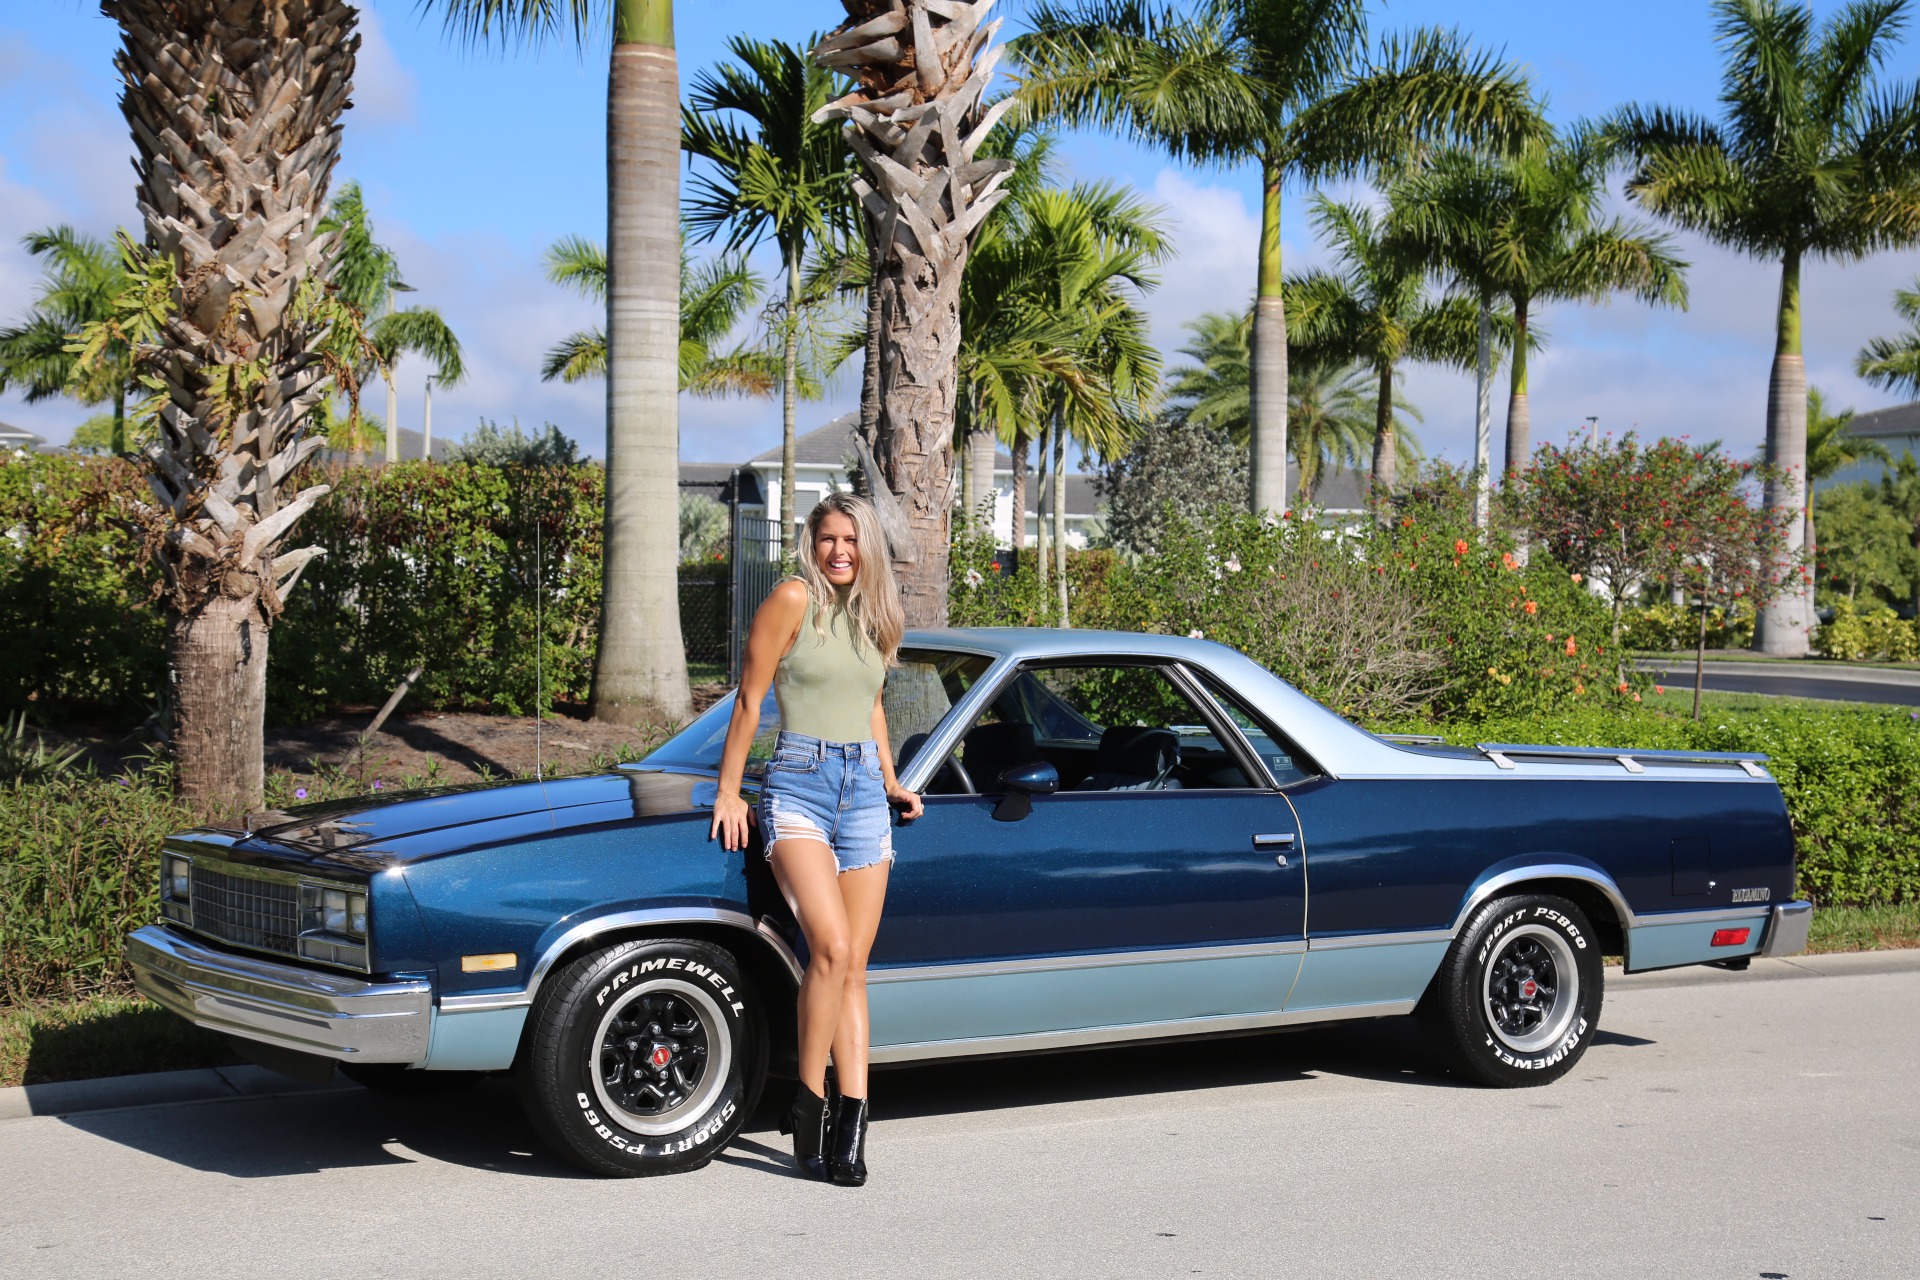 Used 1985 Chevrolet El Camino SS for sale Sold at Muscle Cars for Sale Inc. in Fort Myers FL 33912 5